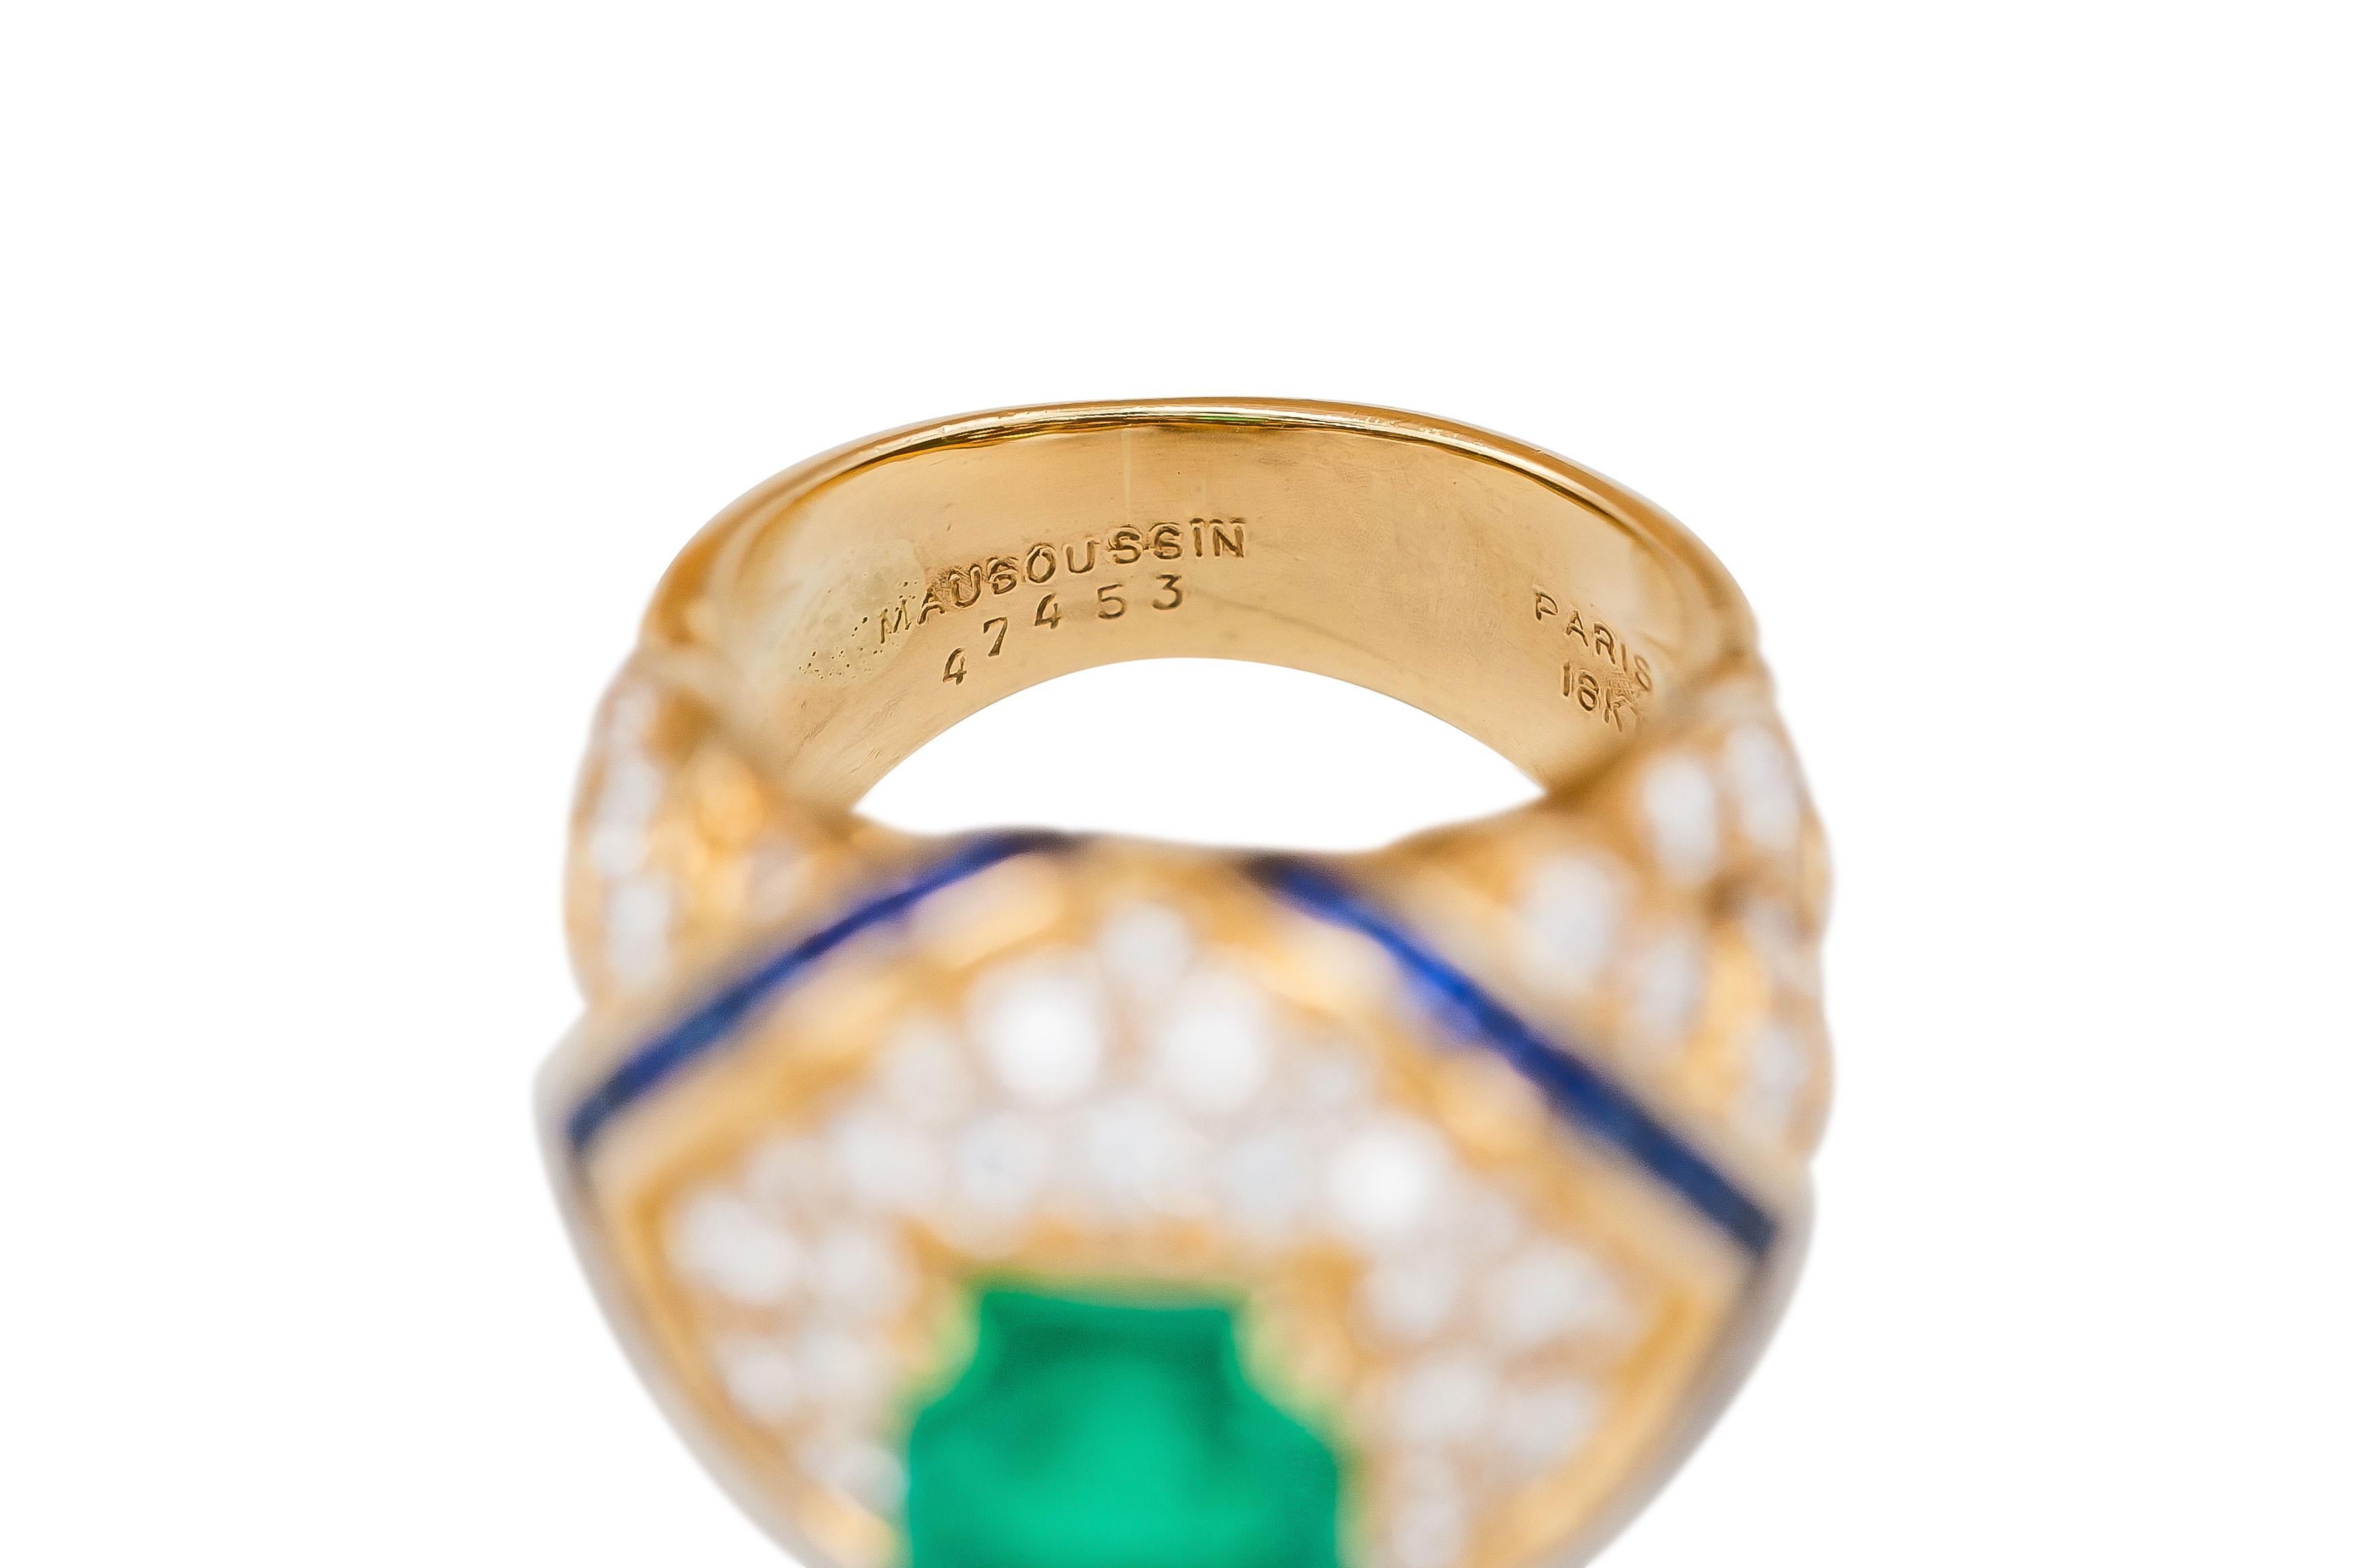 Women's Vintage 1980s Mauboussin Emerald Ring with Diamonds and Sapphires For Sale